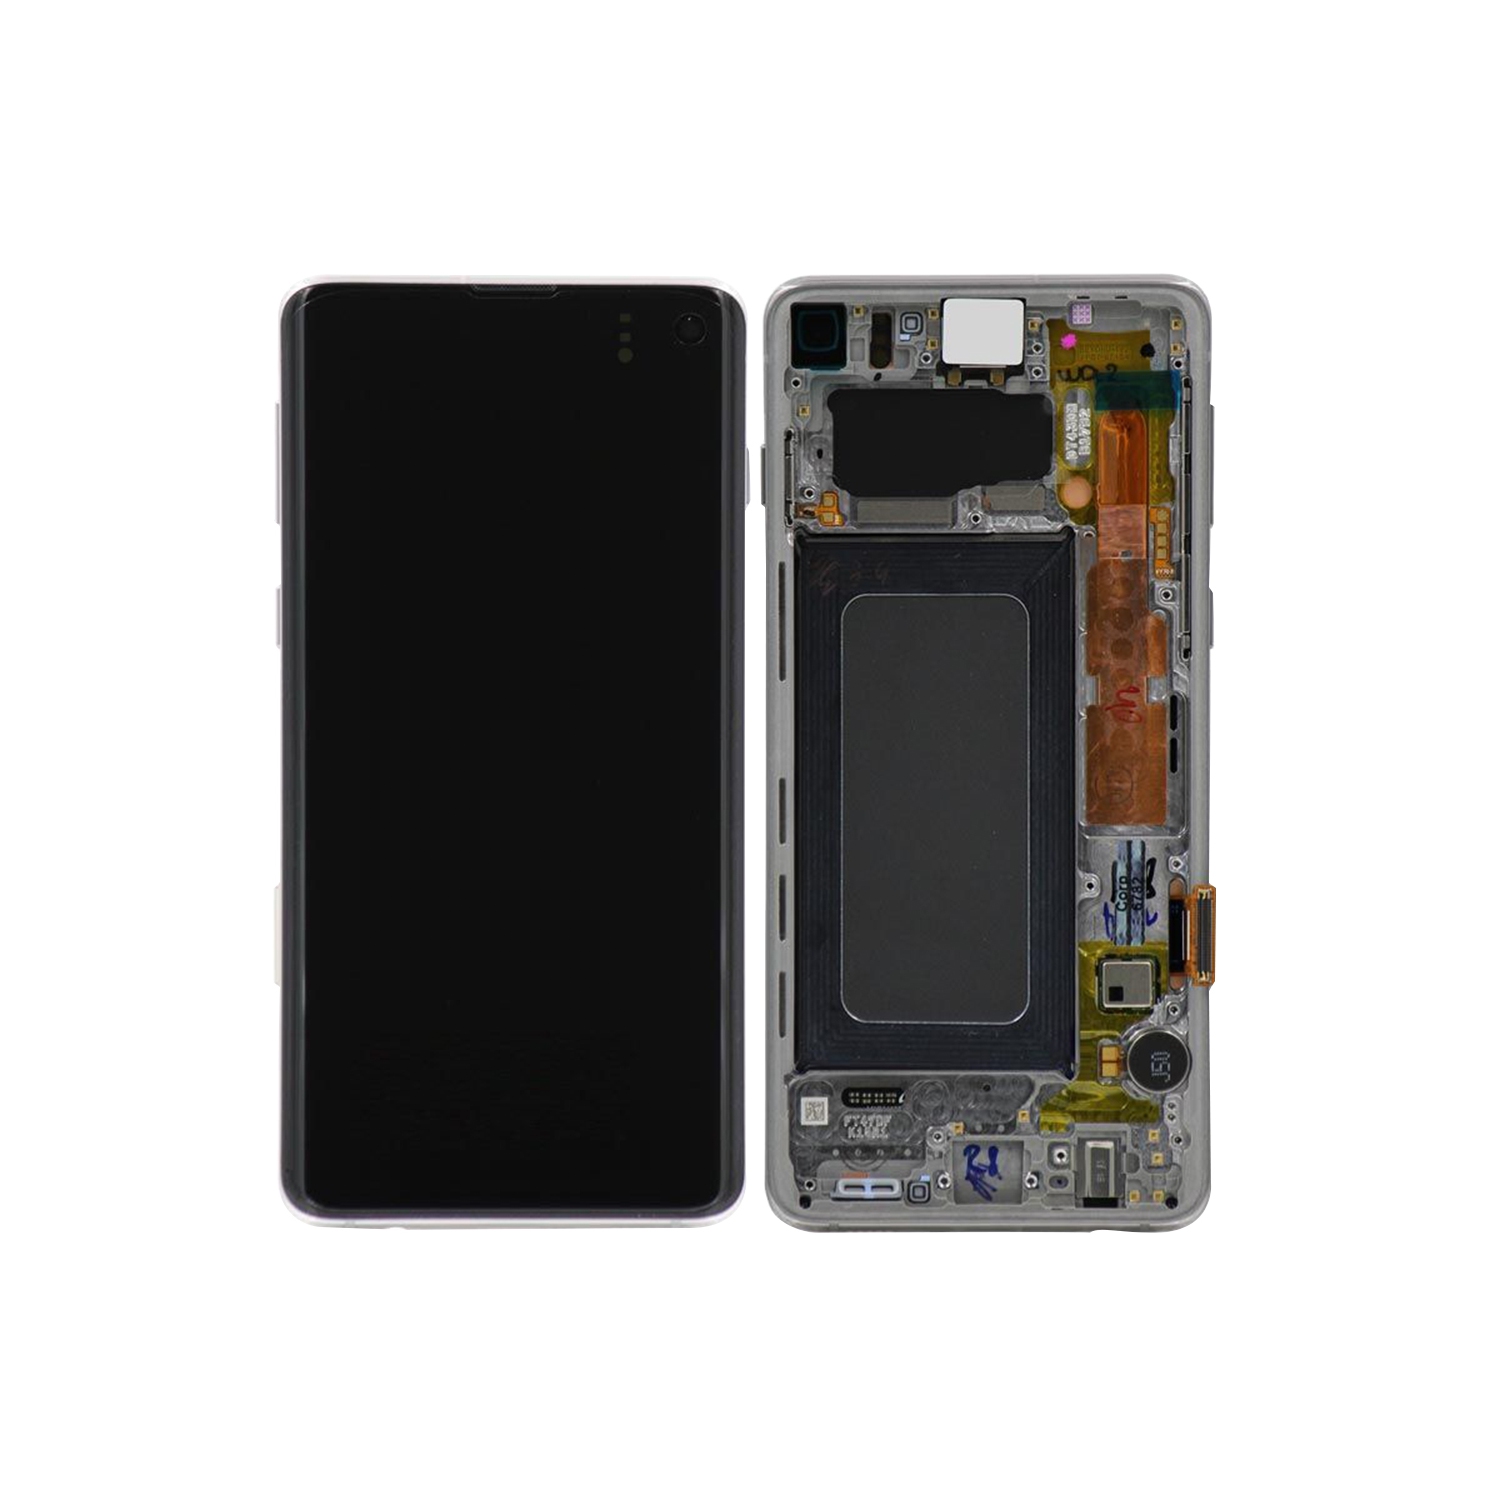 Replacement OLED Display Touch Screen Digitizer Assembly With Frame For Samsung Galaxy S10 (SM-G973W) - Prism White